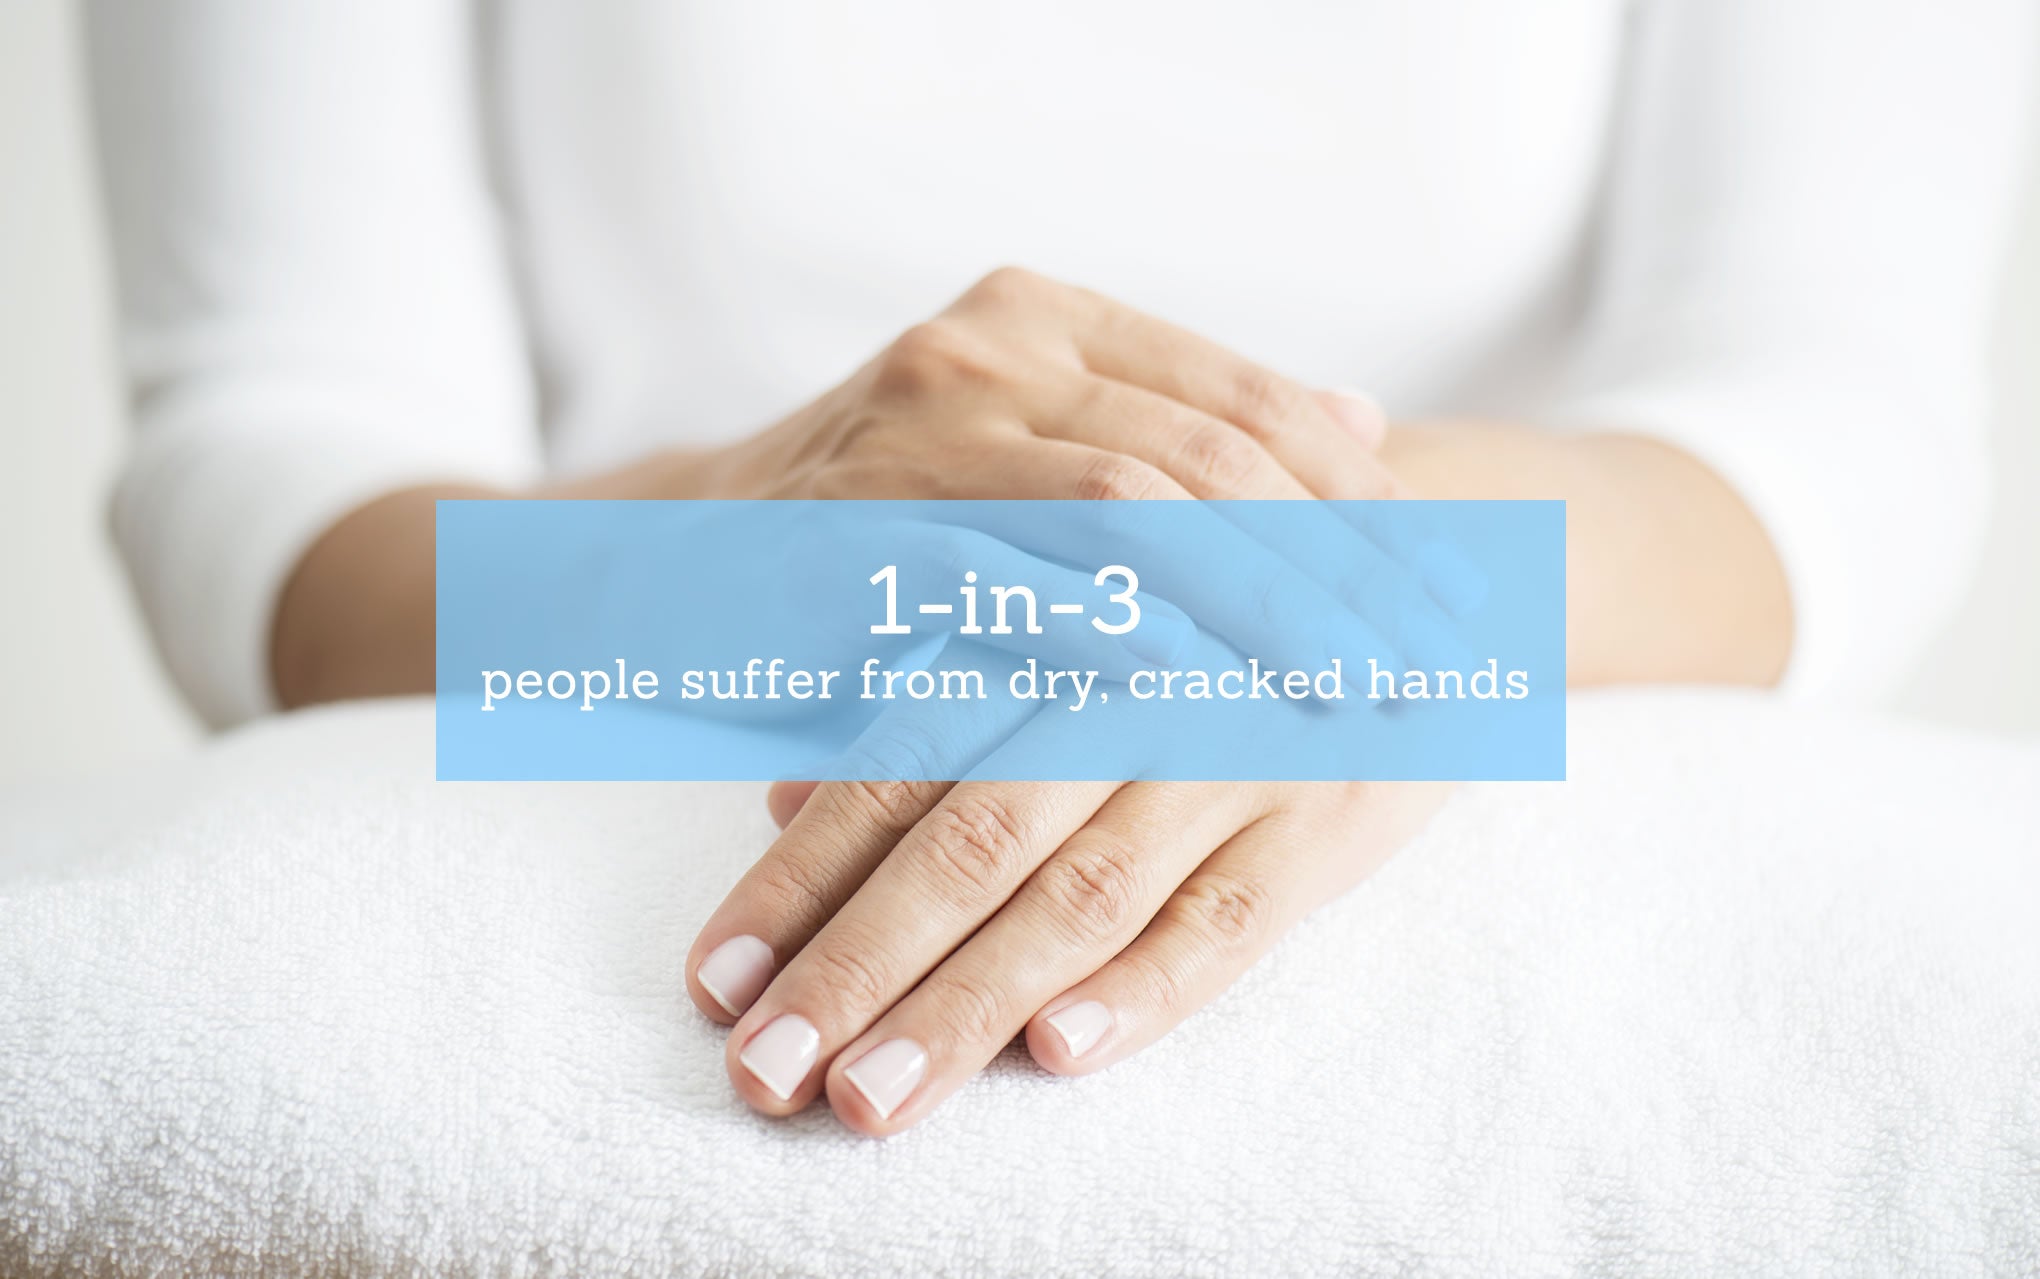 1 in 3 people suffer from dry, cracked hands.